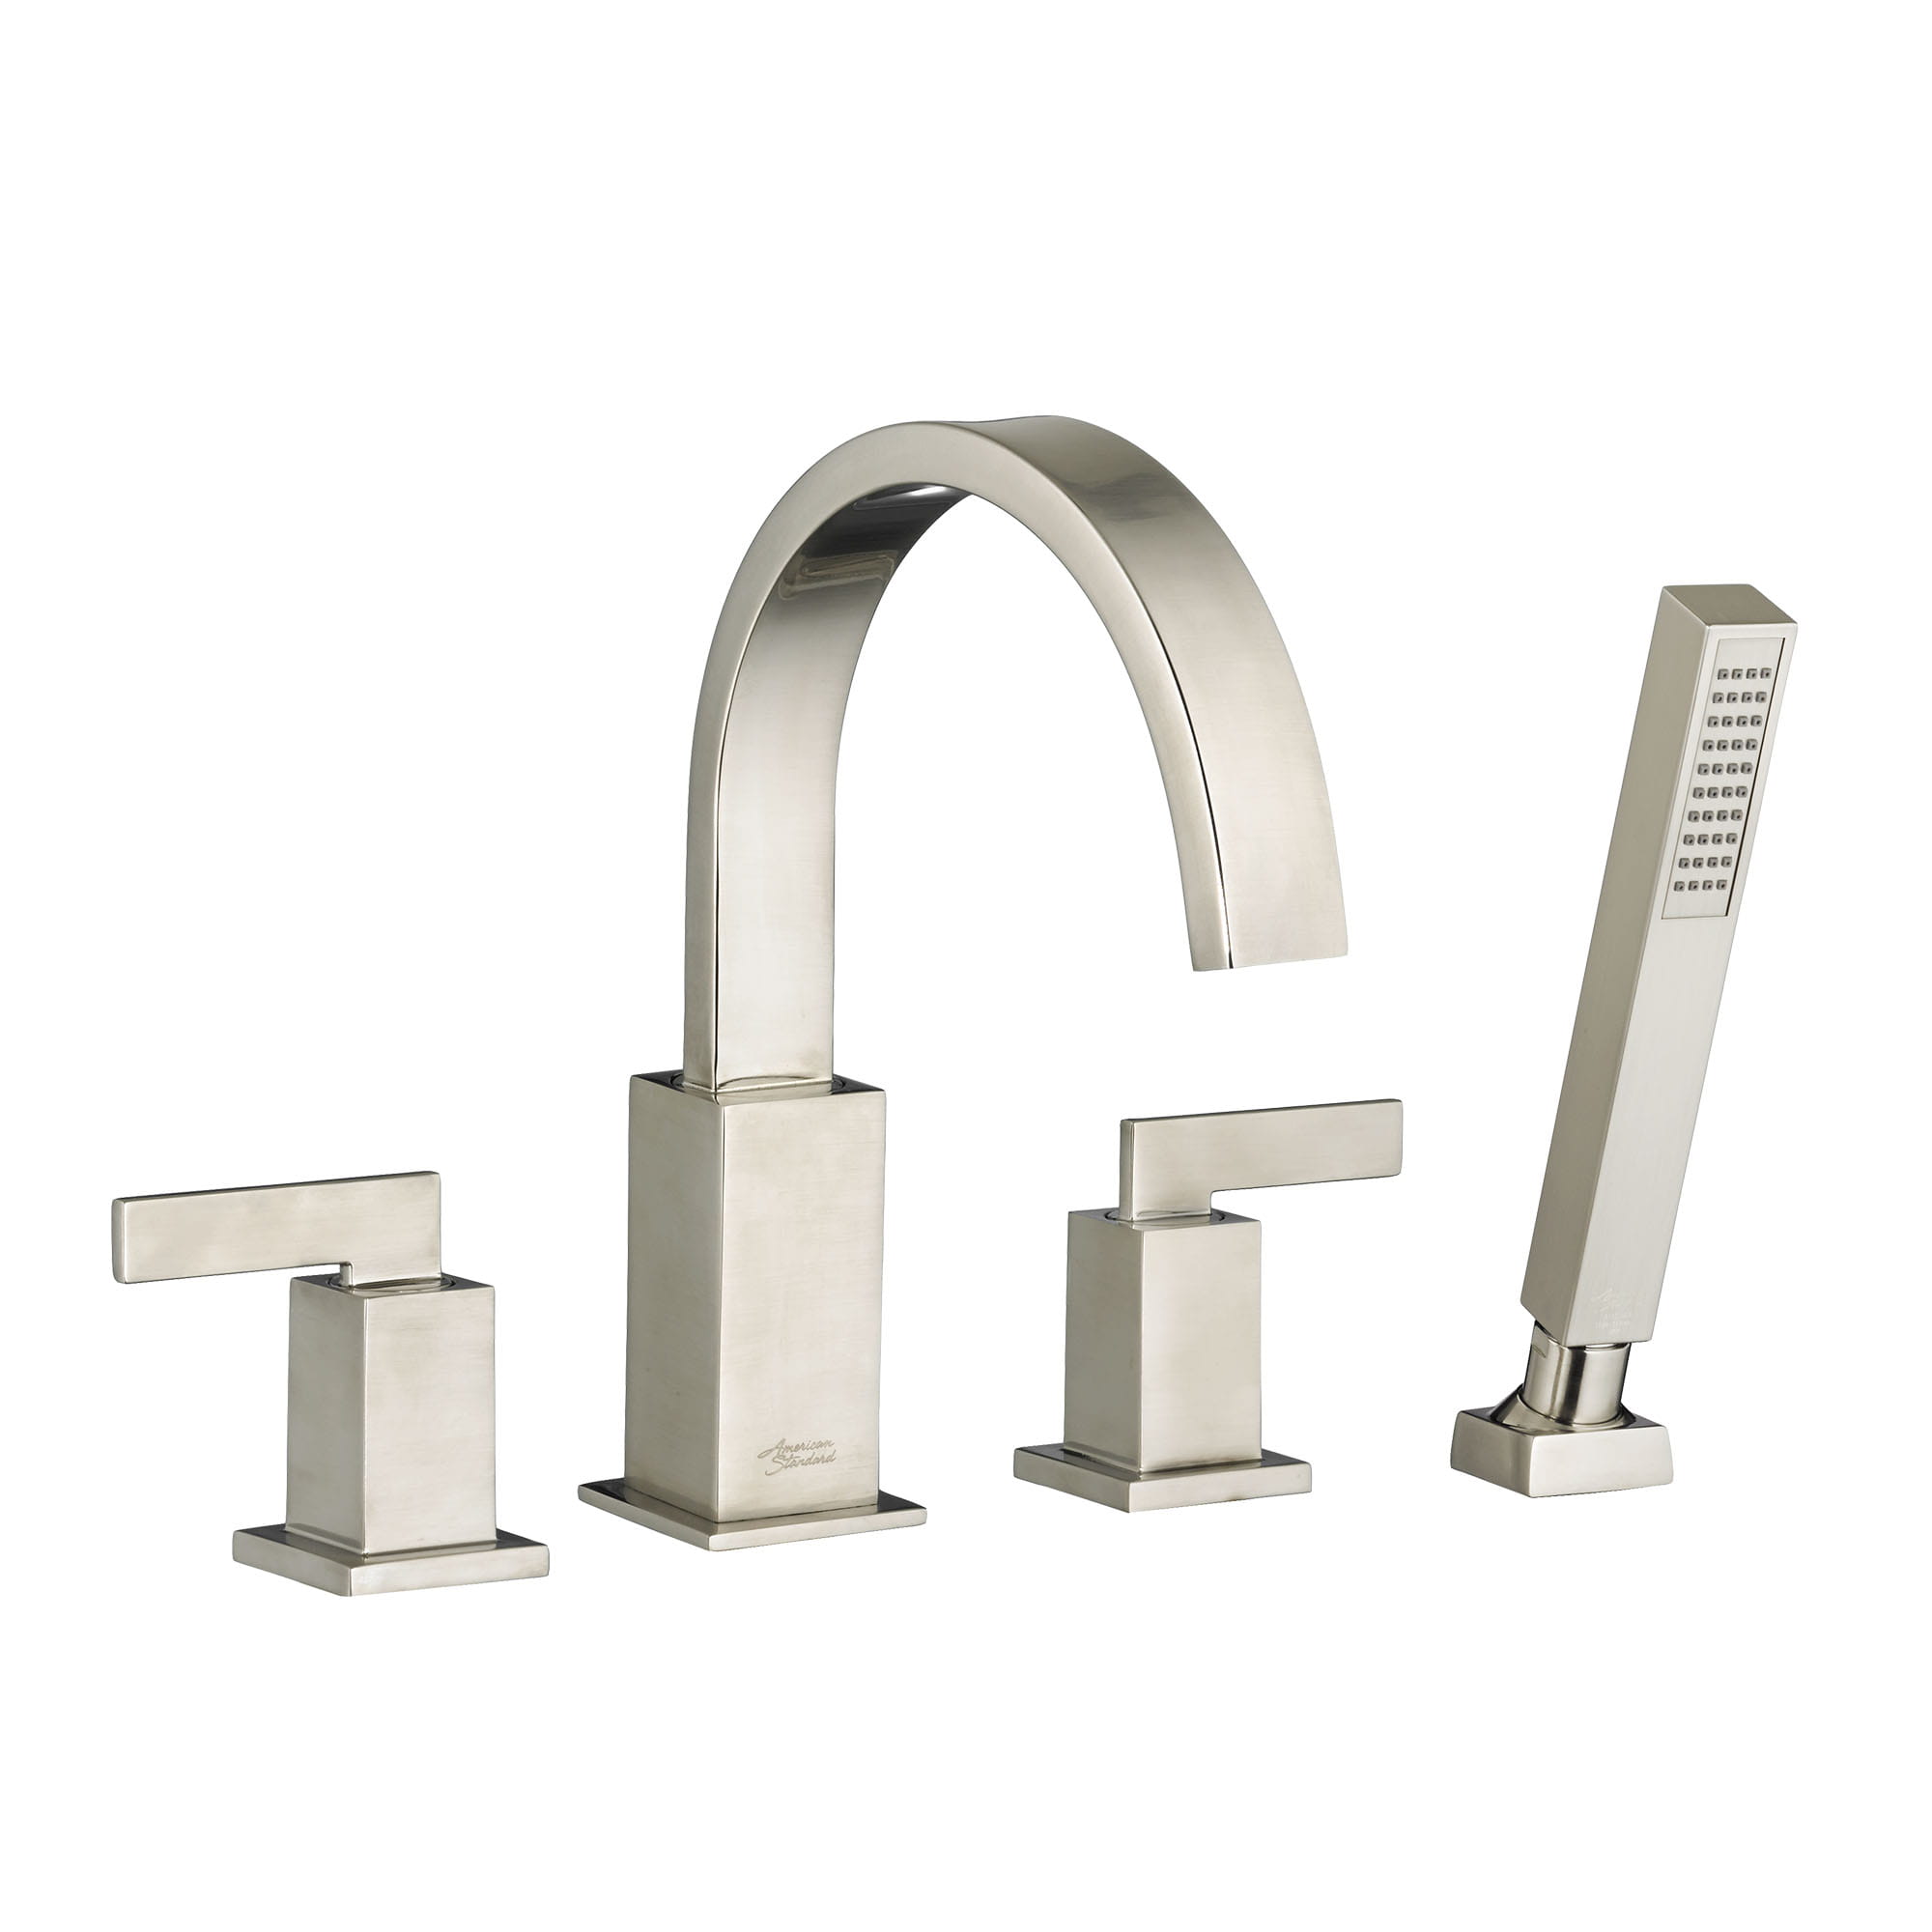 Town Square Bathtub Faucet with Personal Shower for Flash Rough-in Valve with Lever Handles